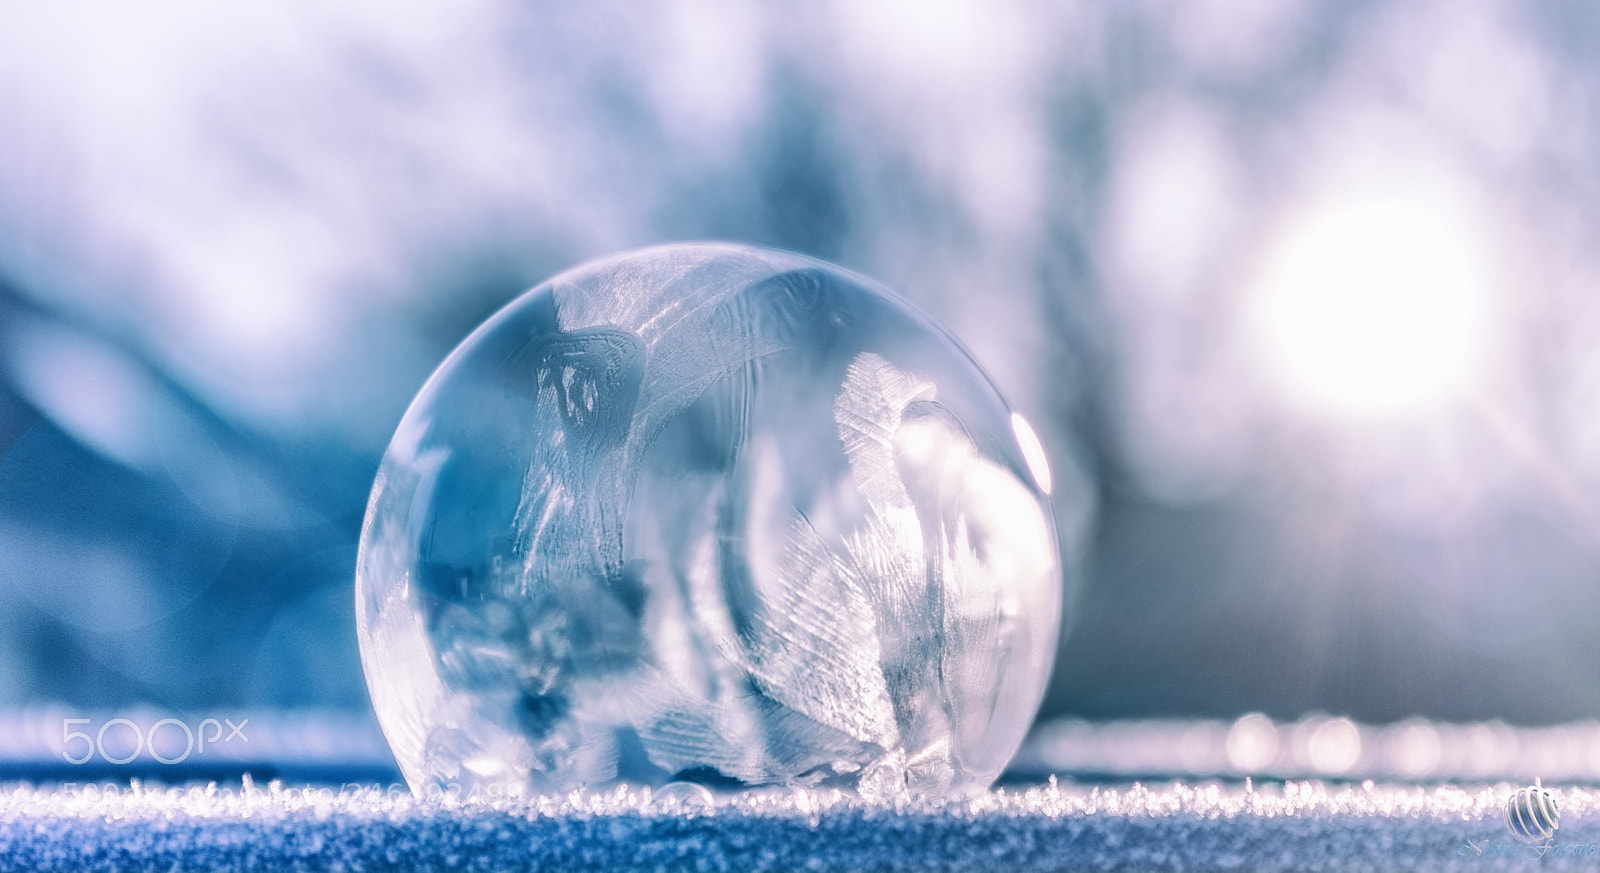 Pentax K-3 II sample photo. Cold bubble photography